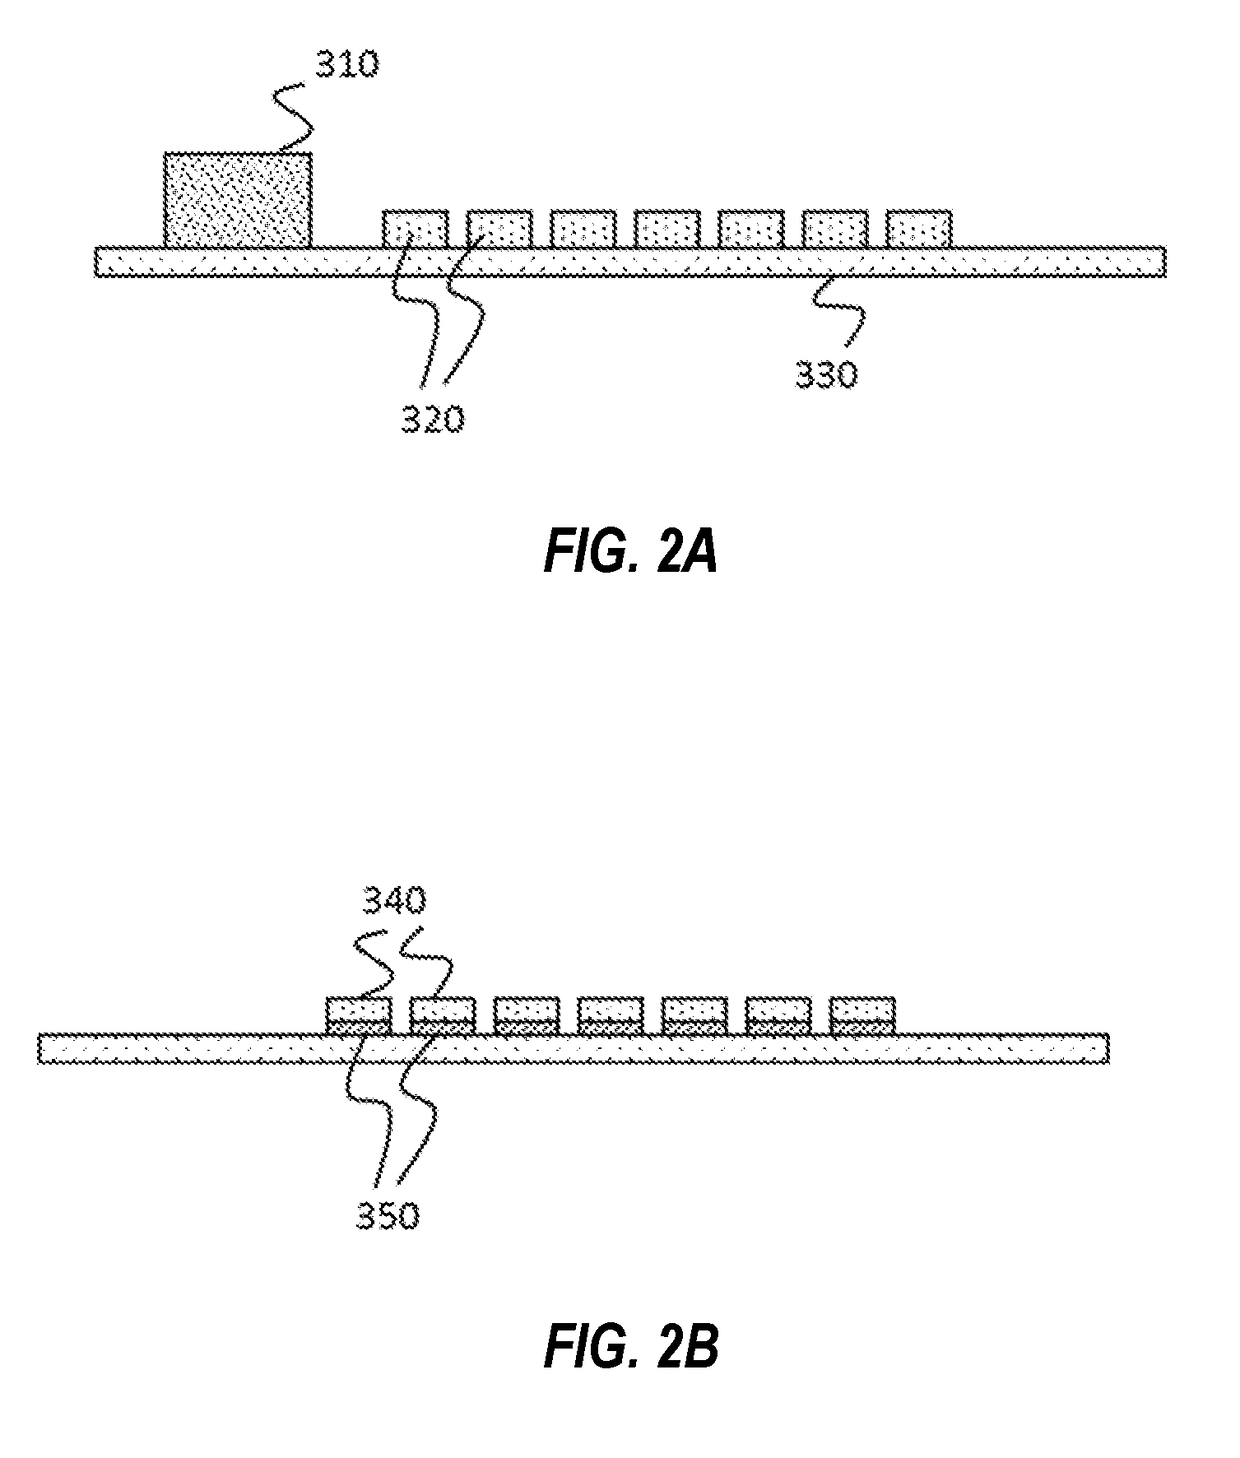 Fabrication and Operation of Multi-Function Flexible Radiation Detection Systems